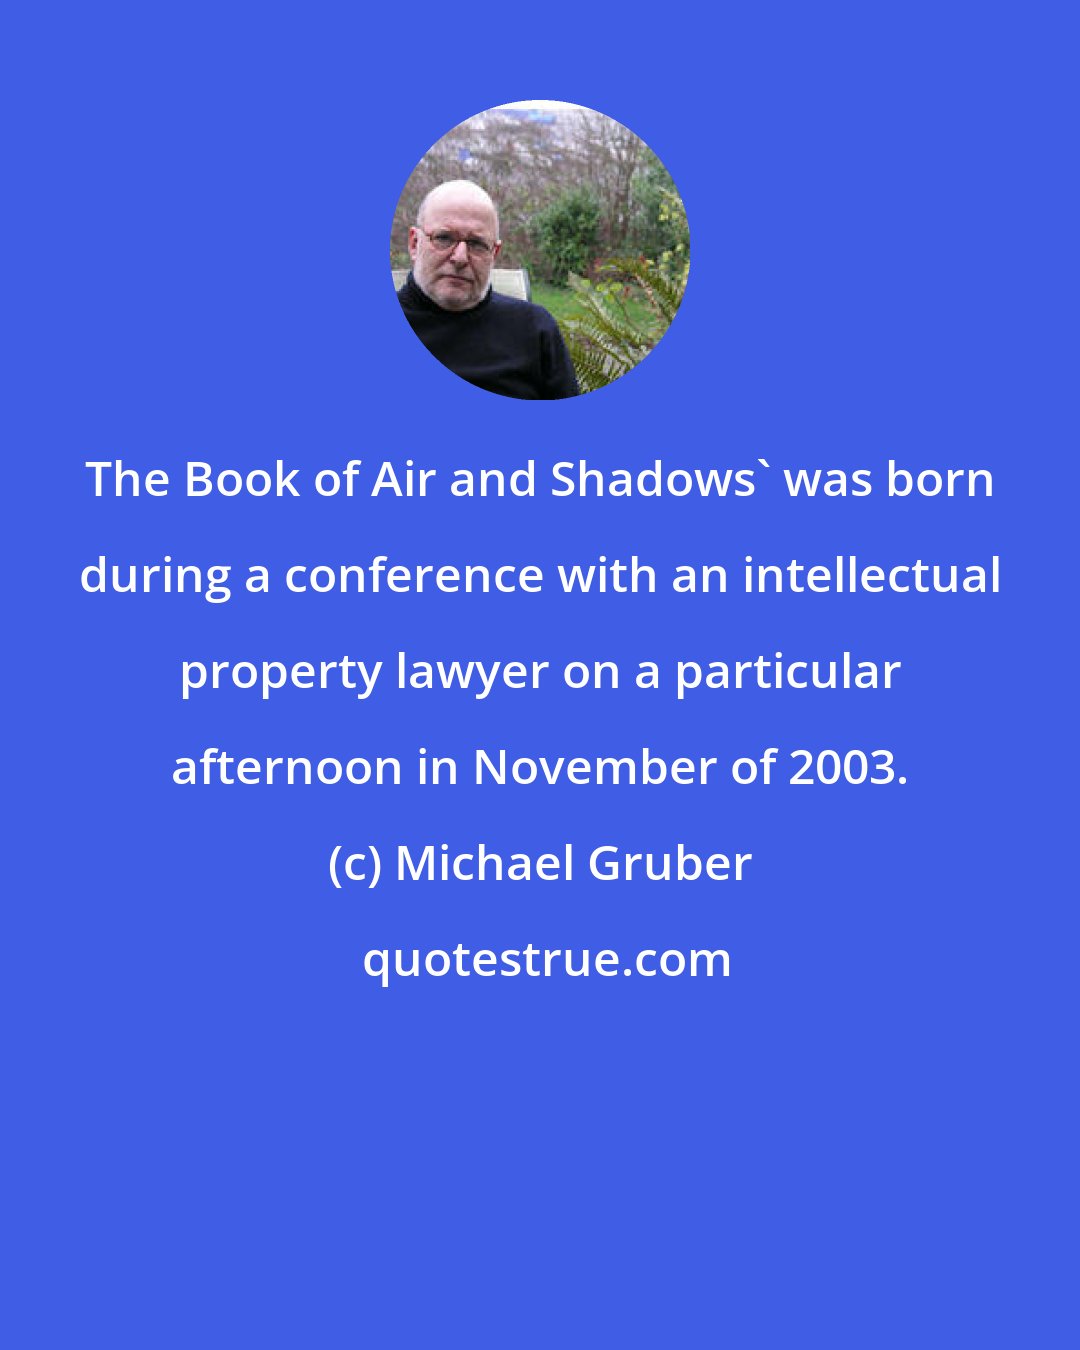 Michael Gruber: The Book of Air and Shadows' was born during a conference with an intellectual property lawyer on a particular afternoon in November of 2003.